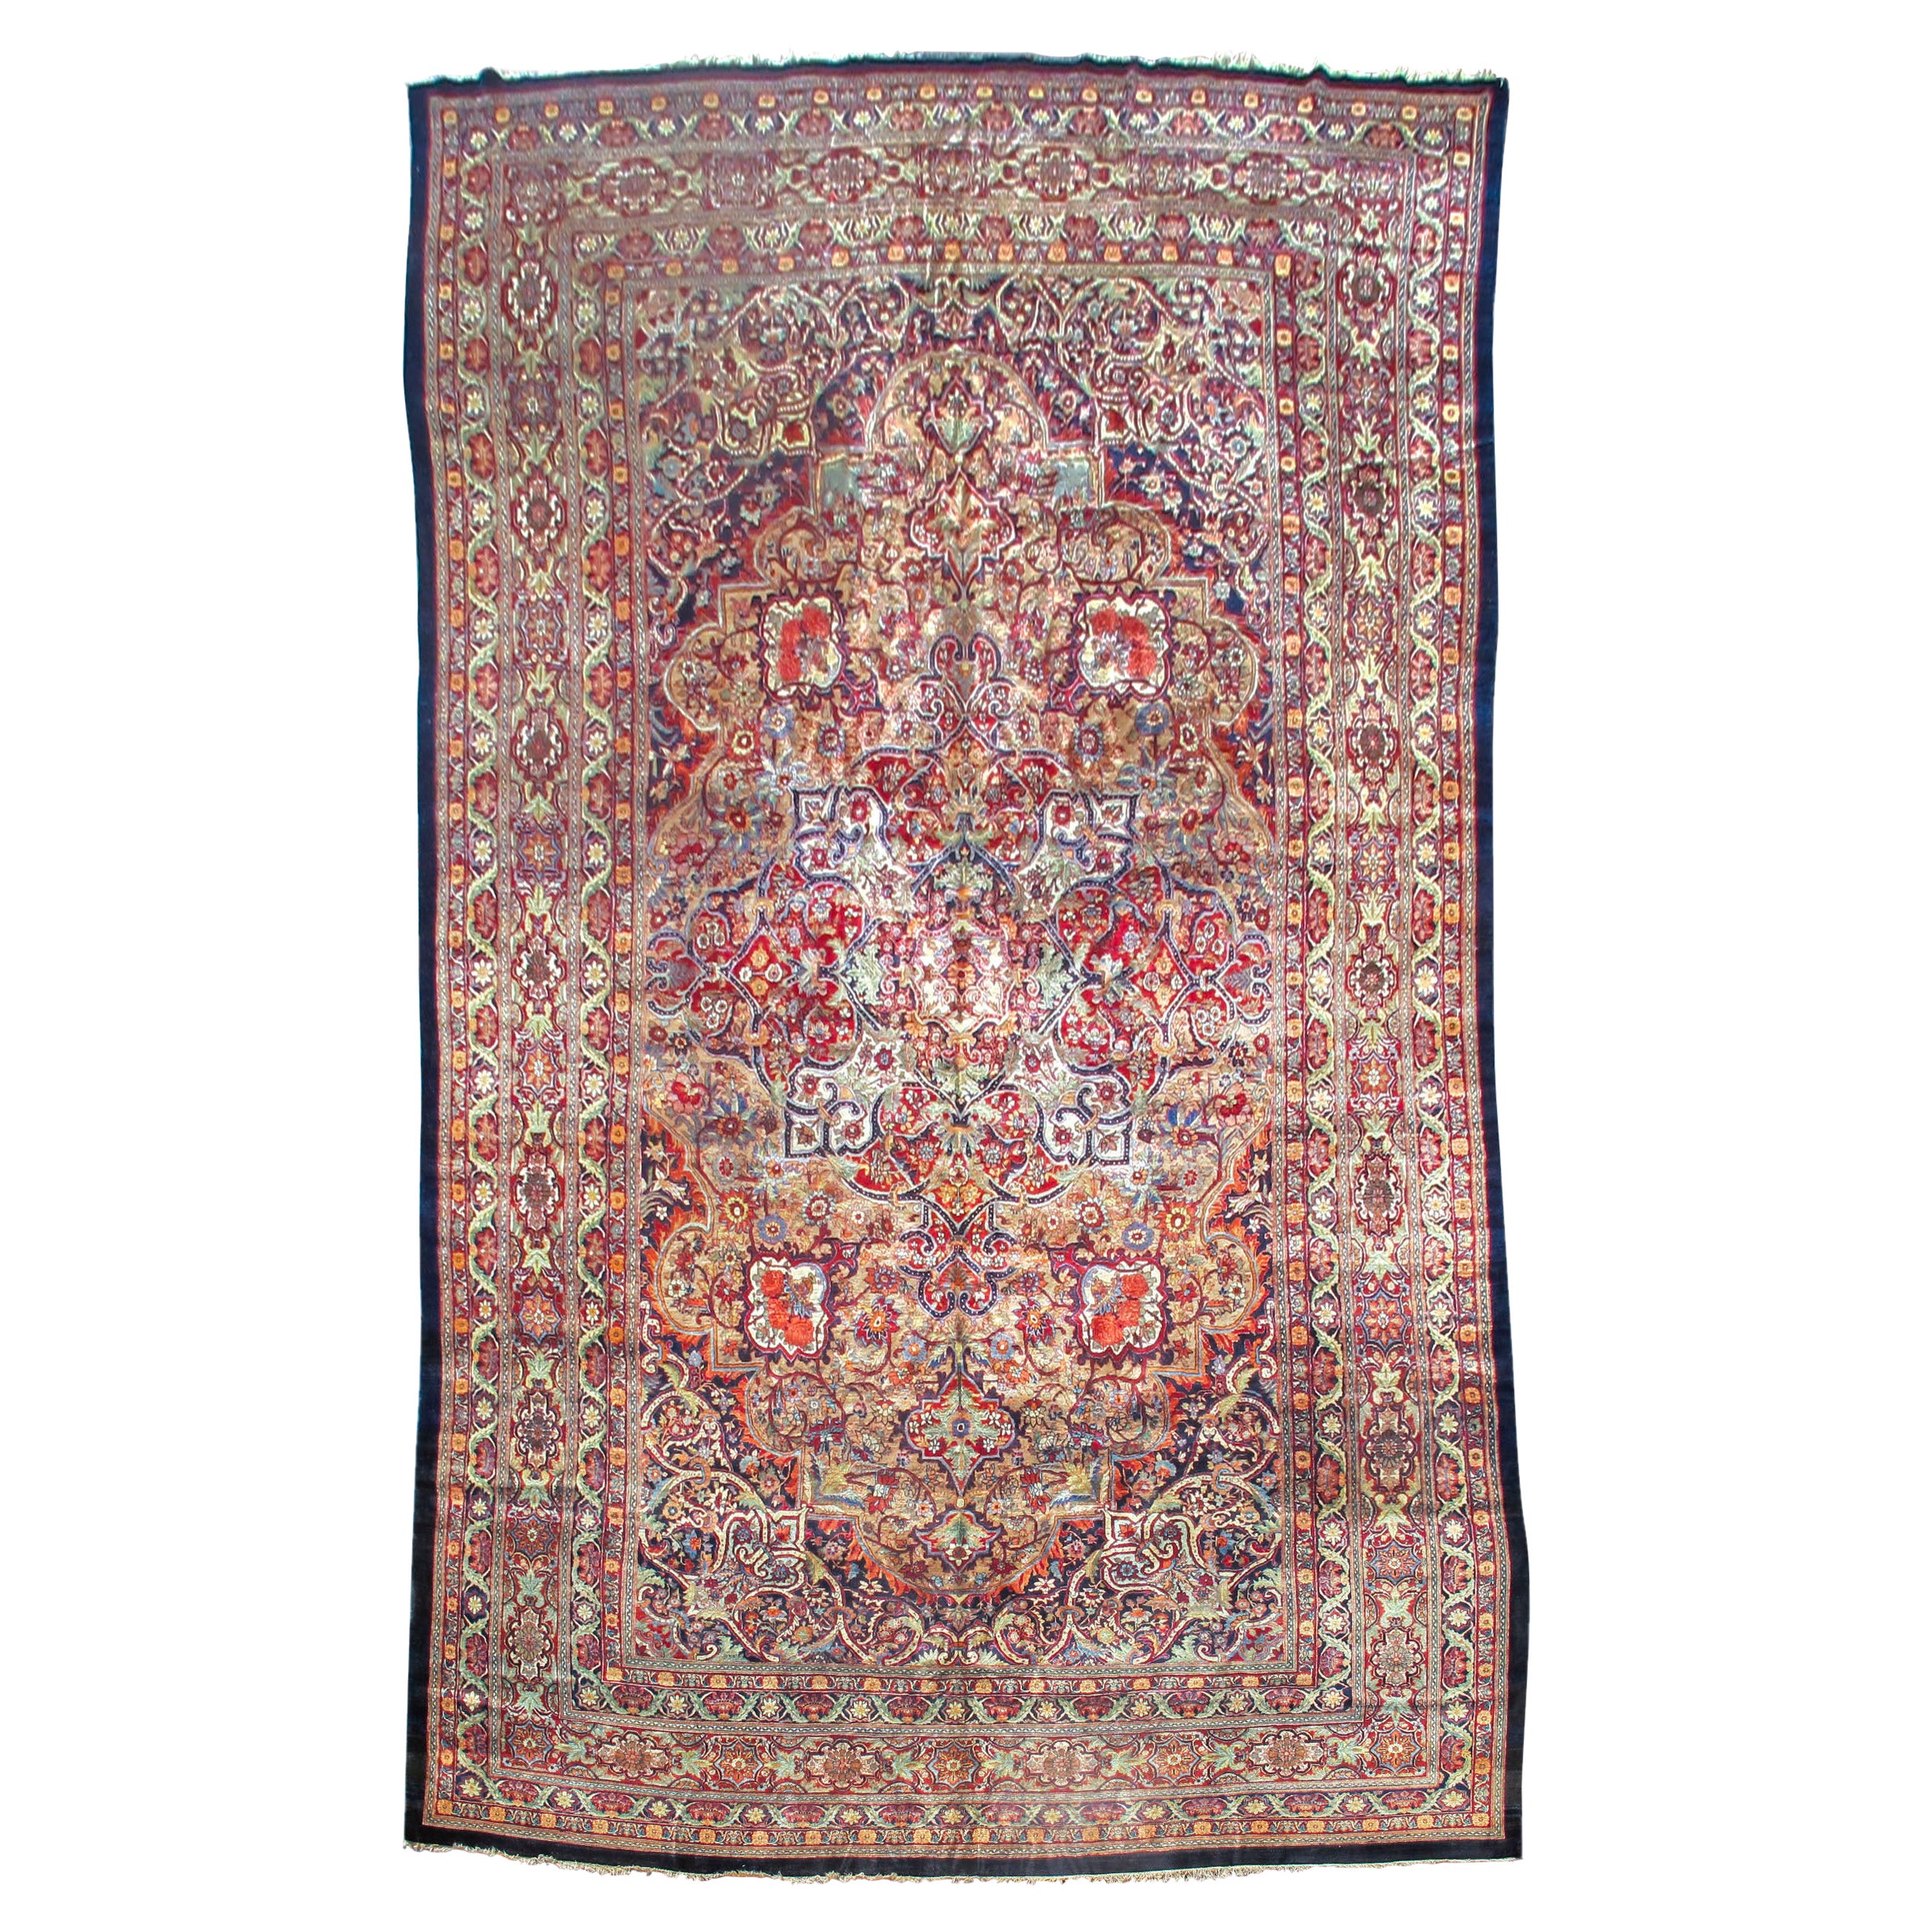 Antique Large Oversized Northeast Persian Carpet, Early 20th Century For Sale